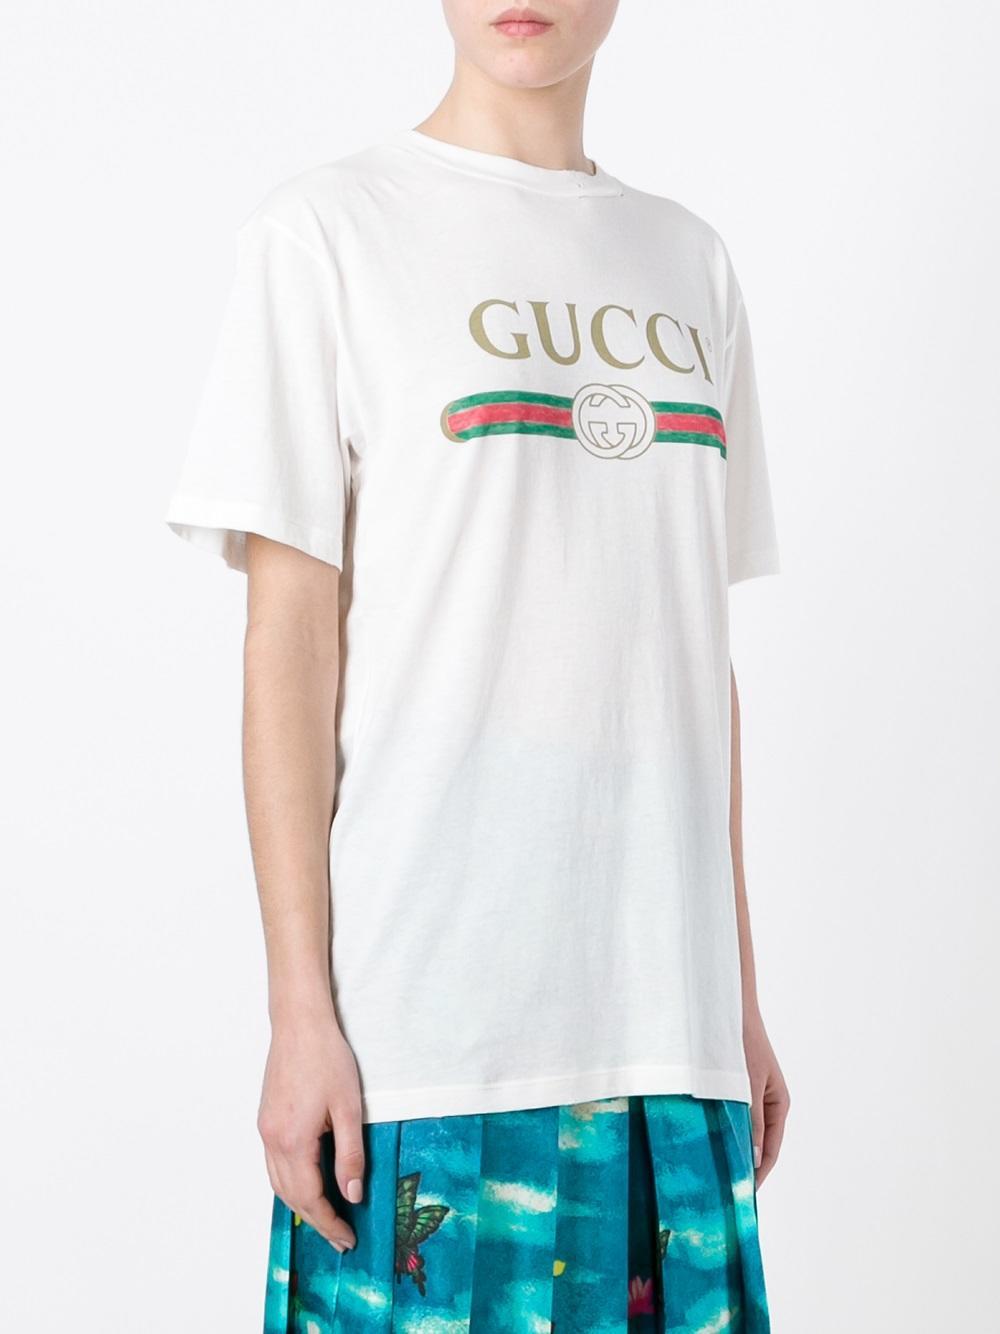 Gucci Print T-shirt in White | Lyst